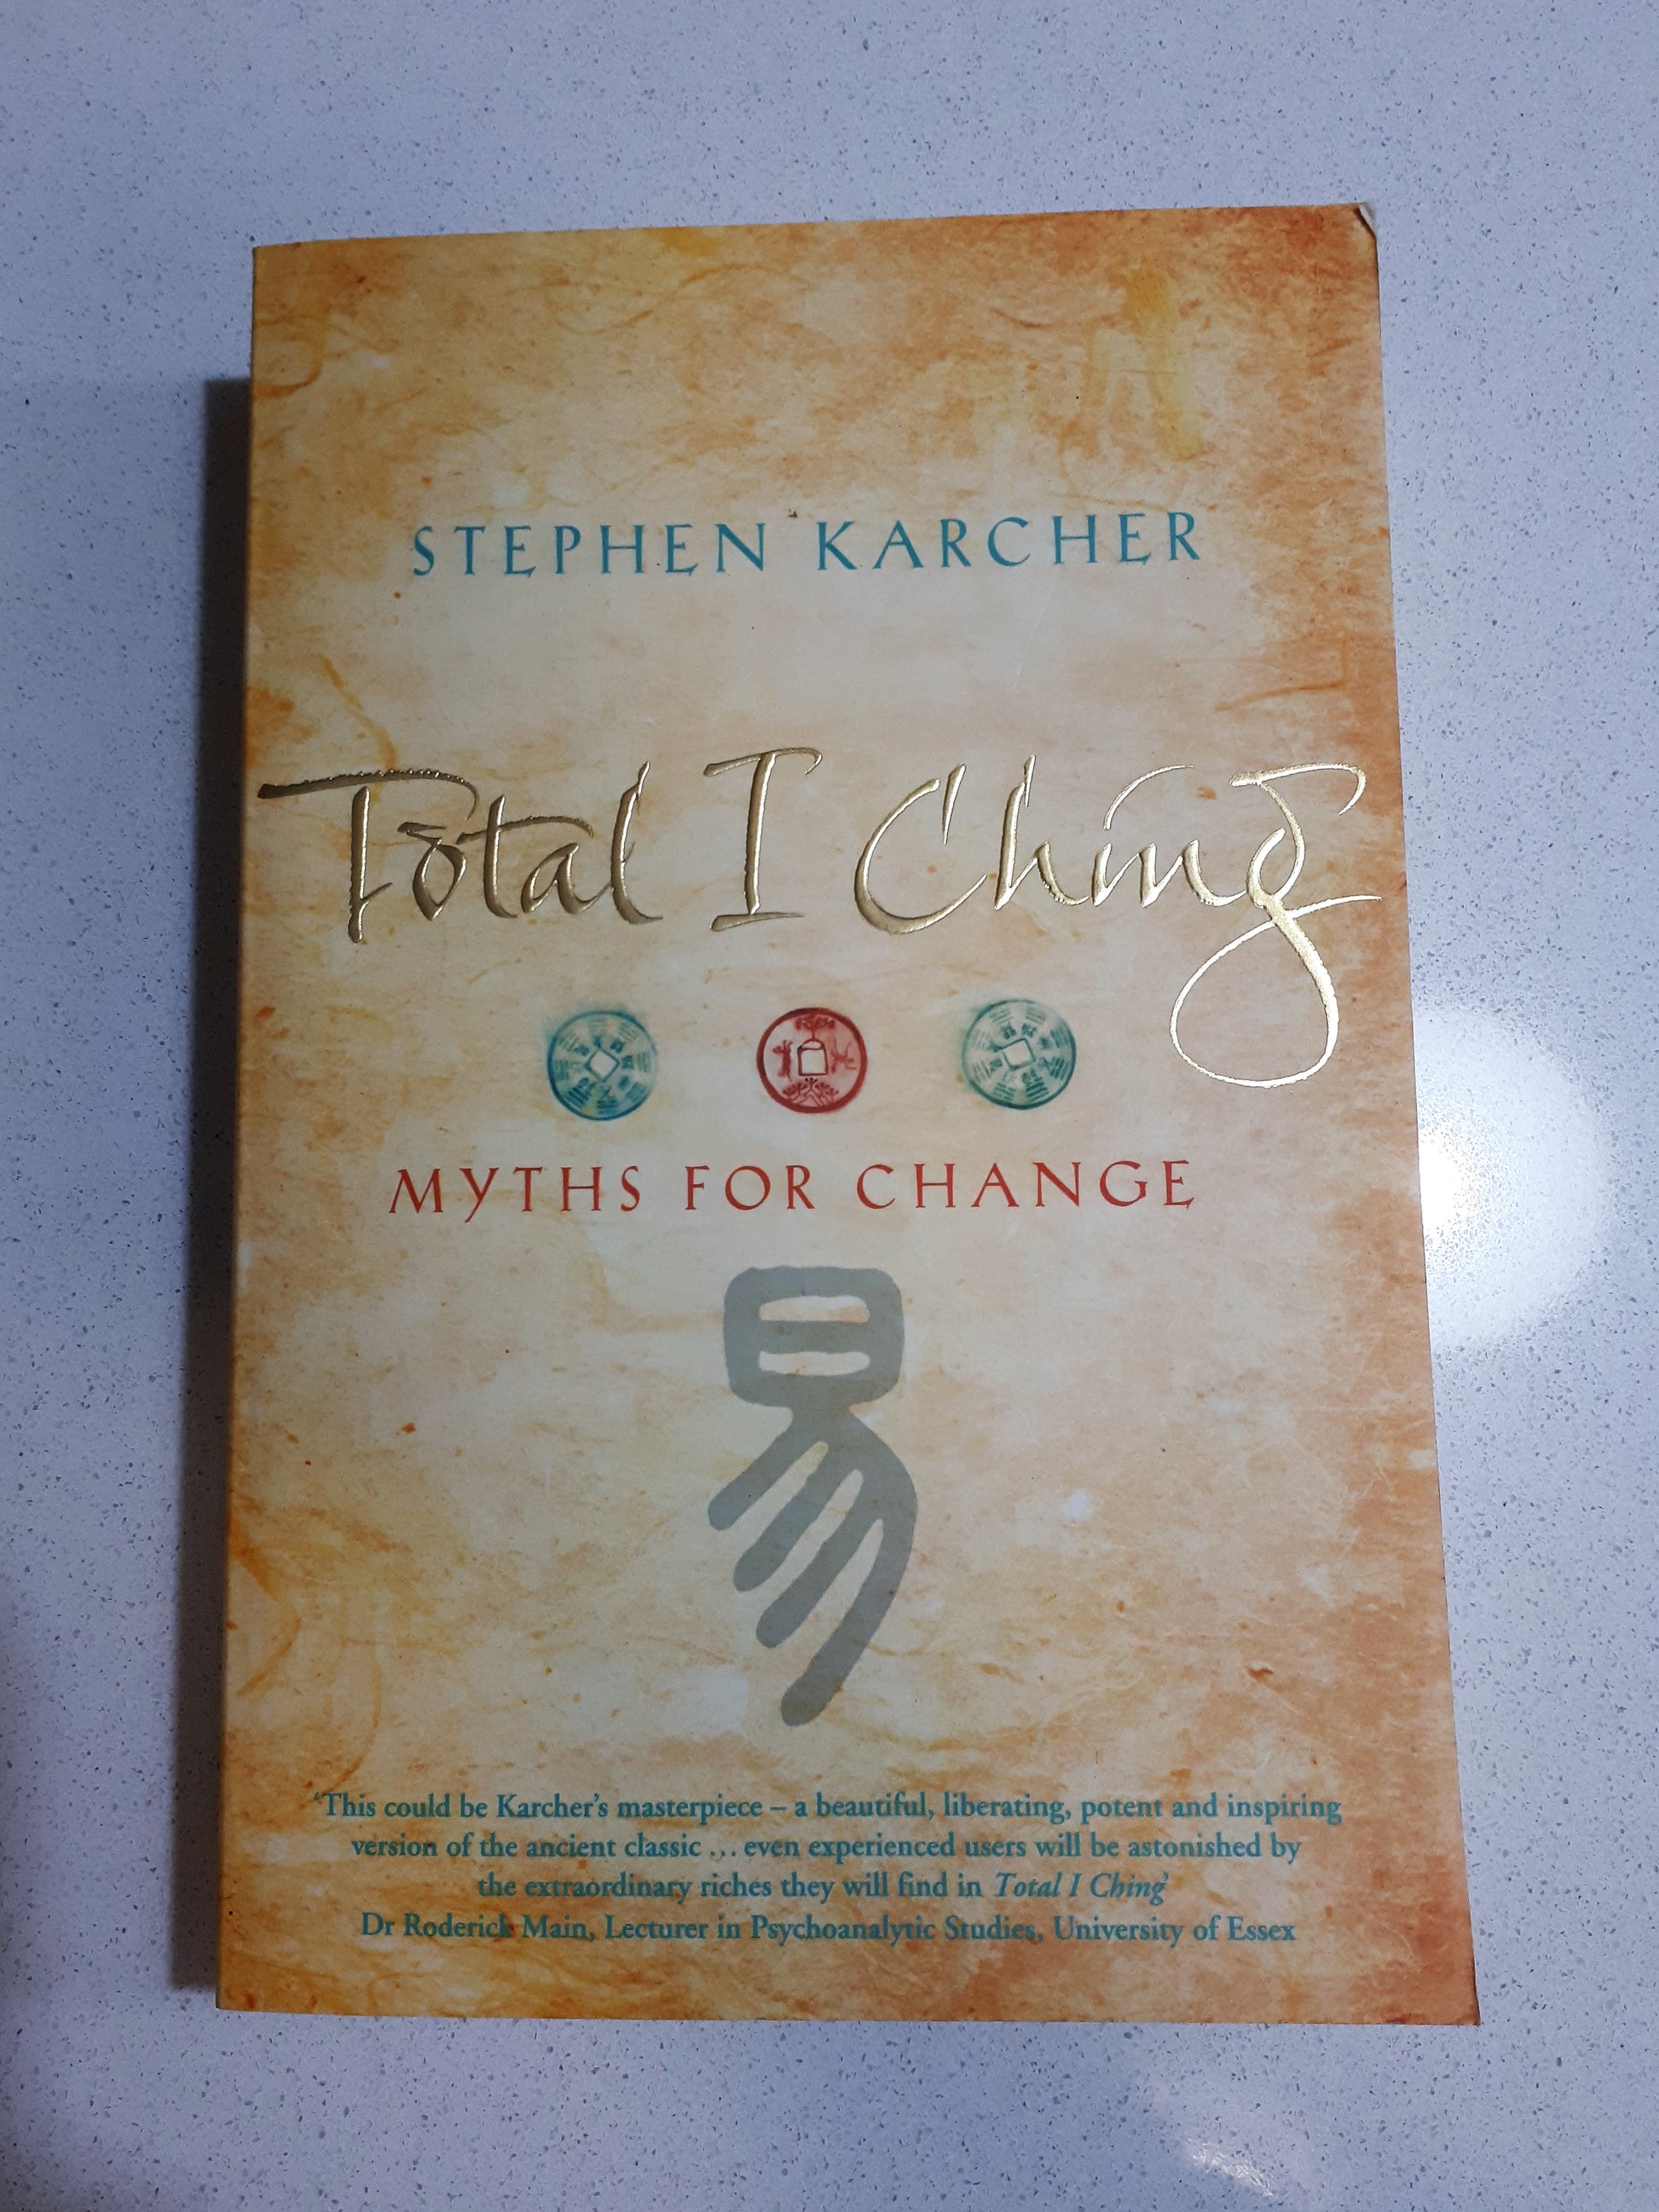 Total I Ching - Myths For Change by Stephen Karcher